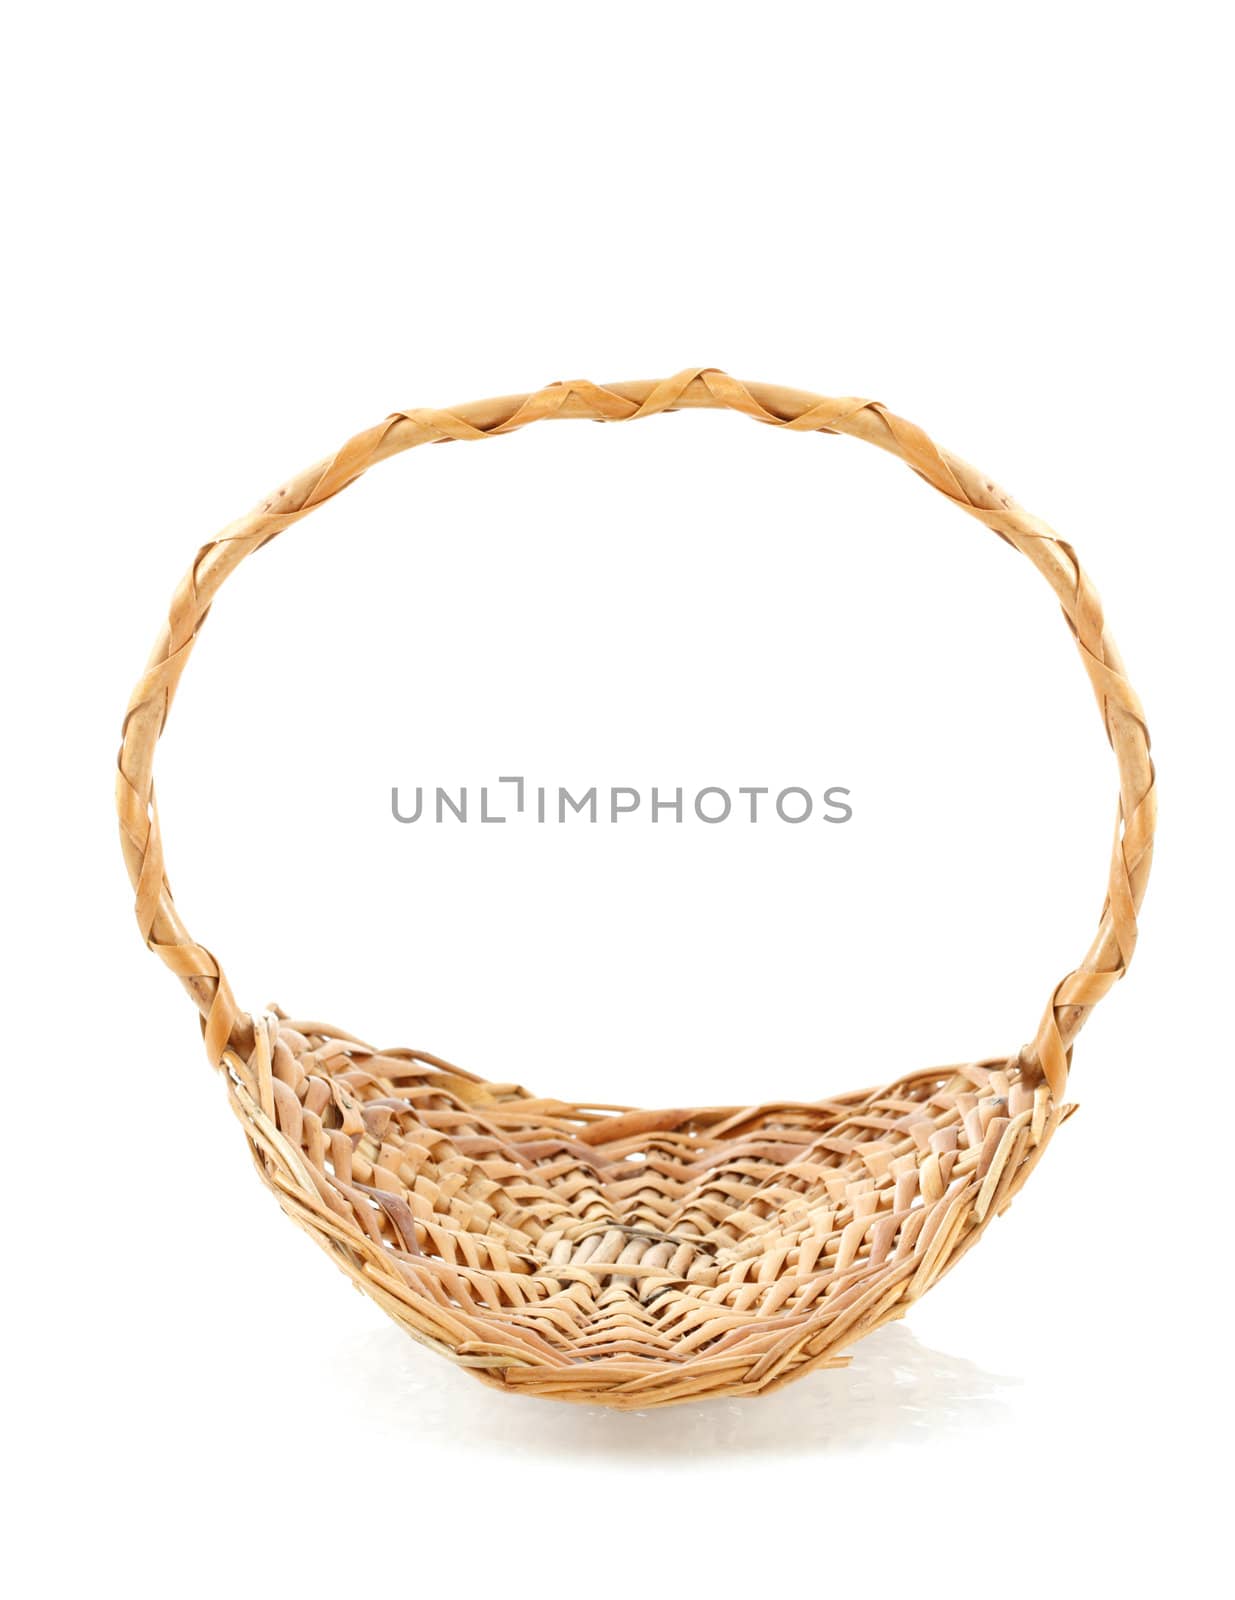 wicker basket with handle, white background